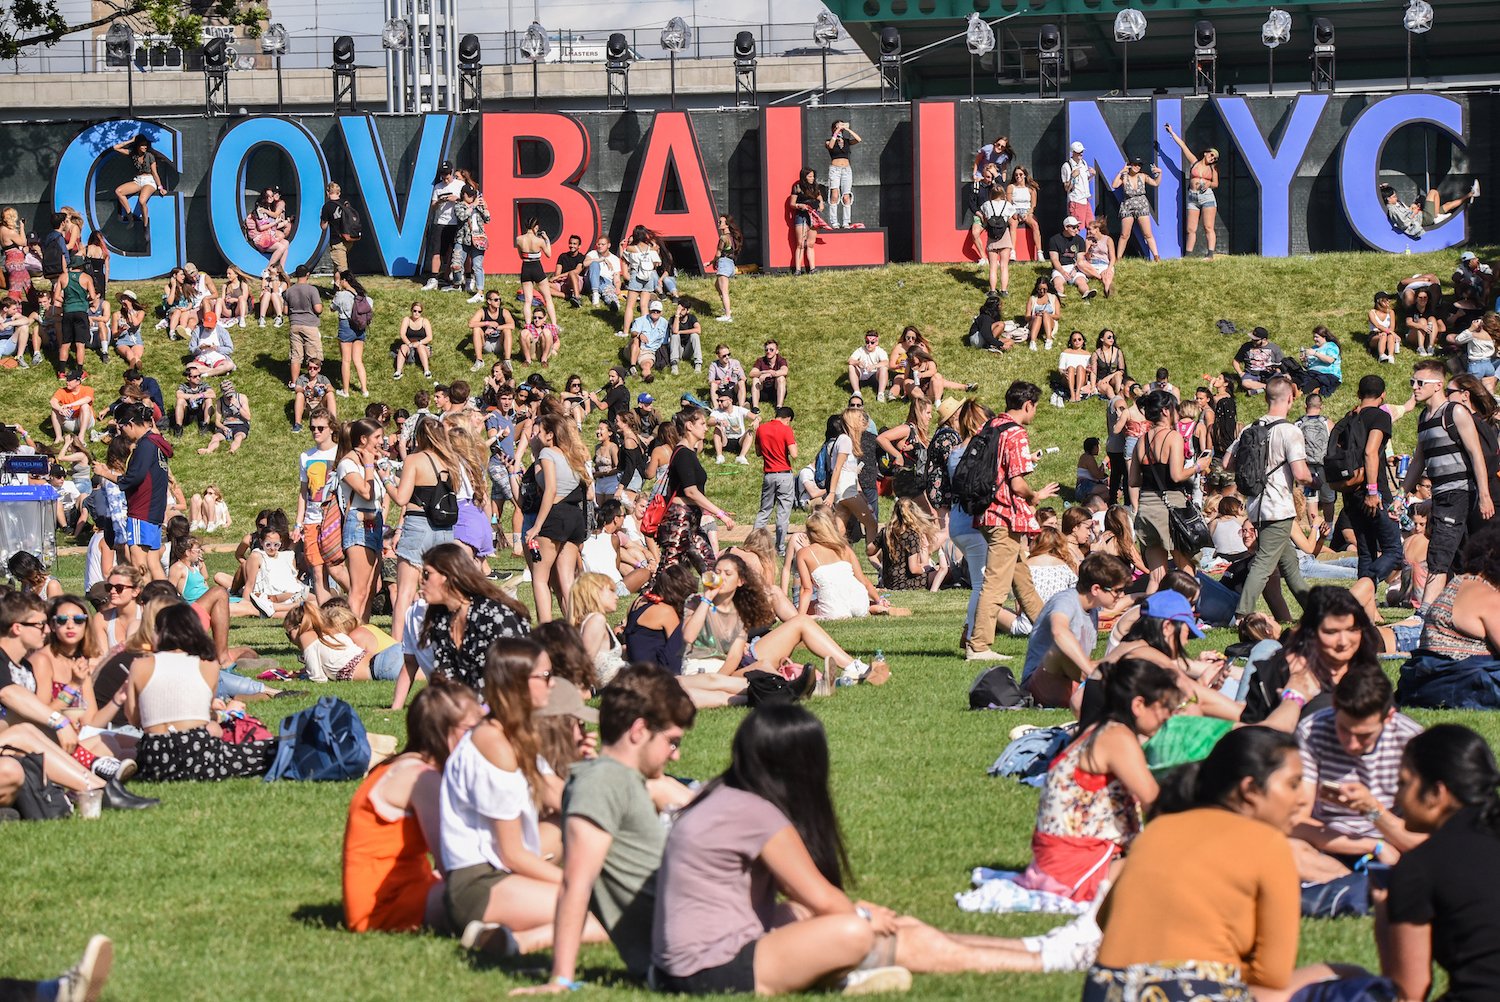 Festivalgoers are seen at 2017 Governors Ball Music Festival - Day 1 at Randall's Island